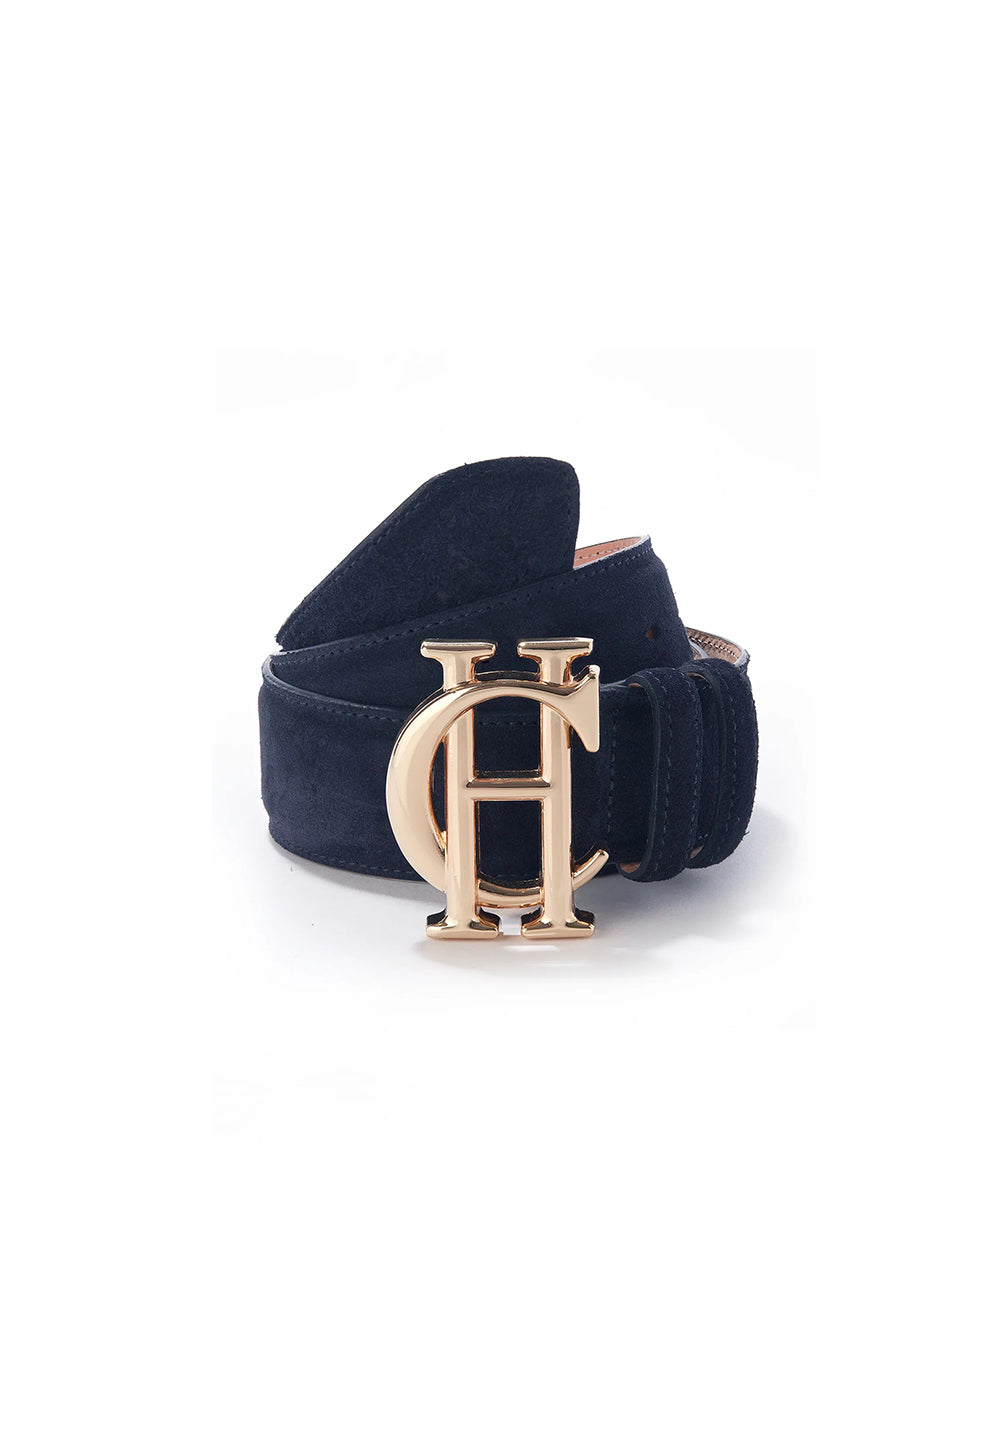 HC Classic Belt Suede - Ink Navy sold by Angel Divine